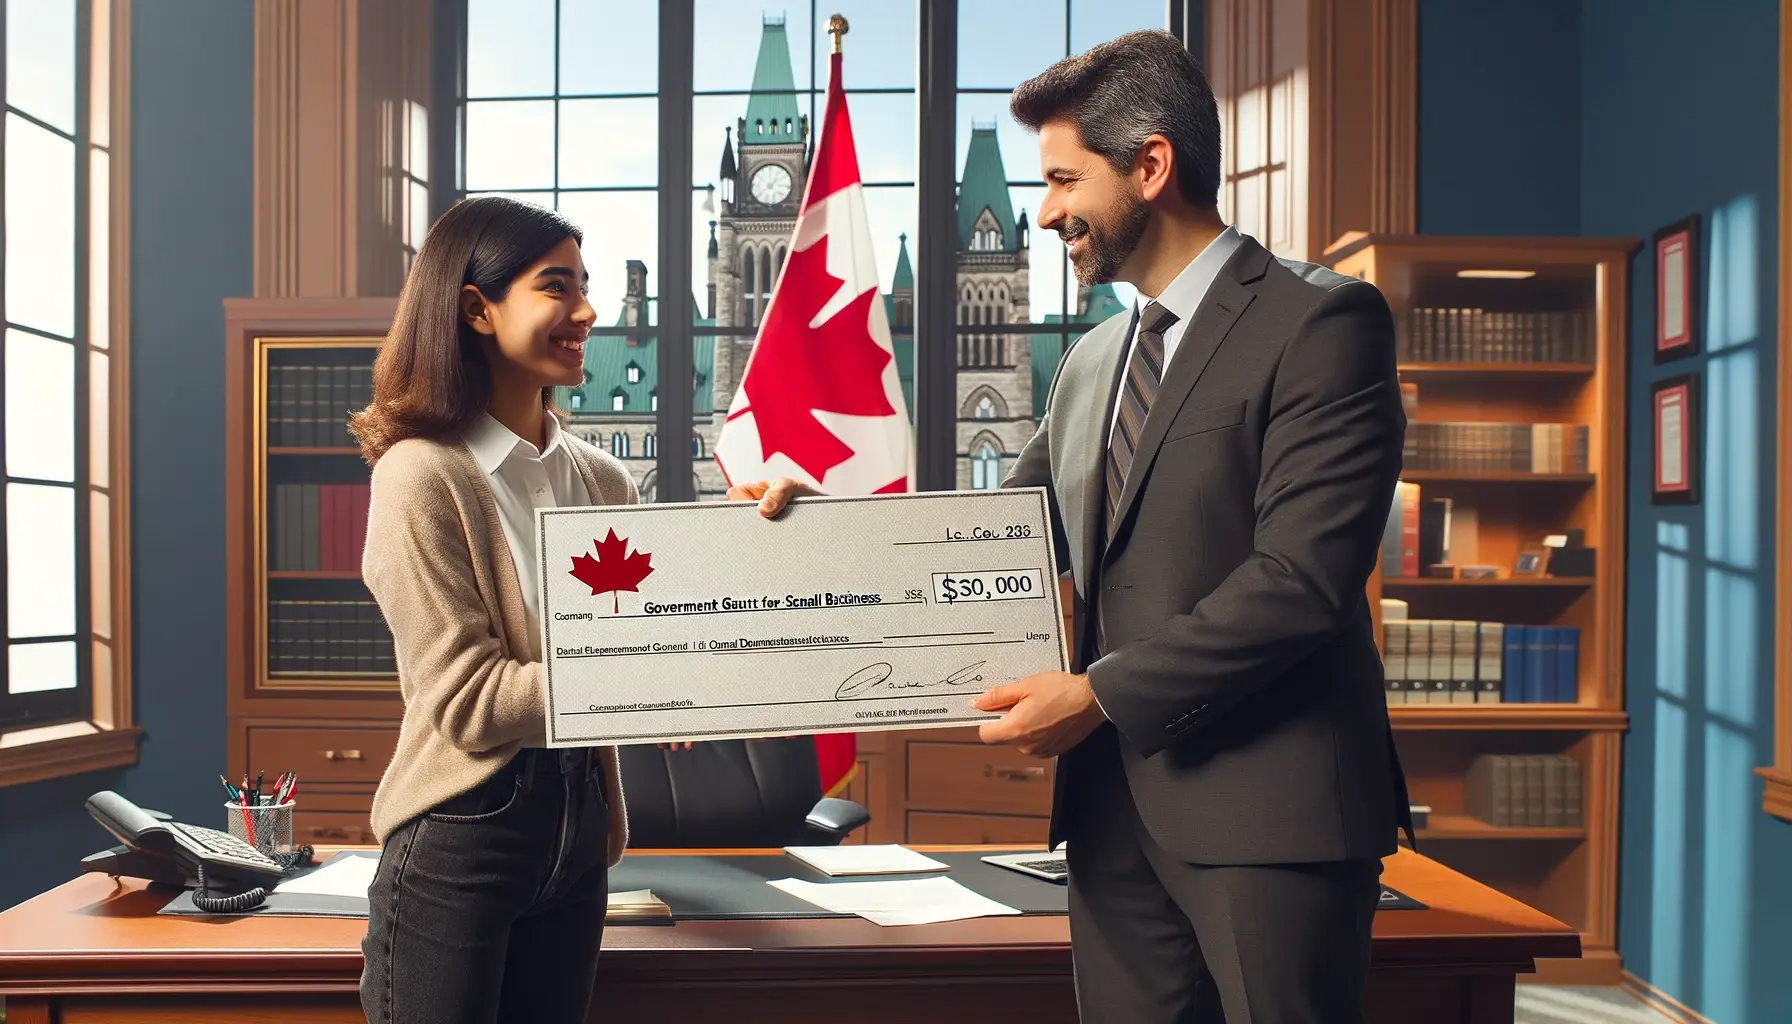 An image of a Canadian politican handing a novelty cheque to a small business owner